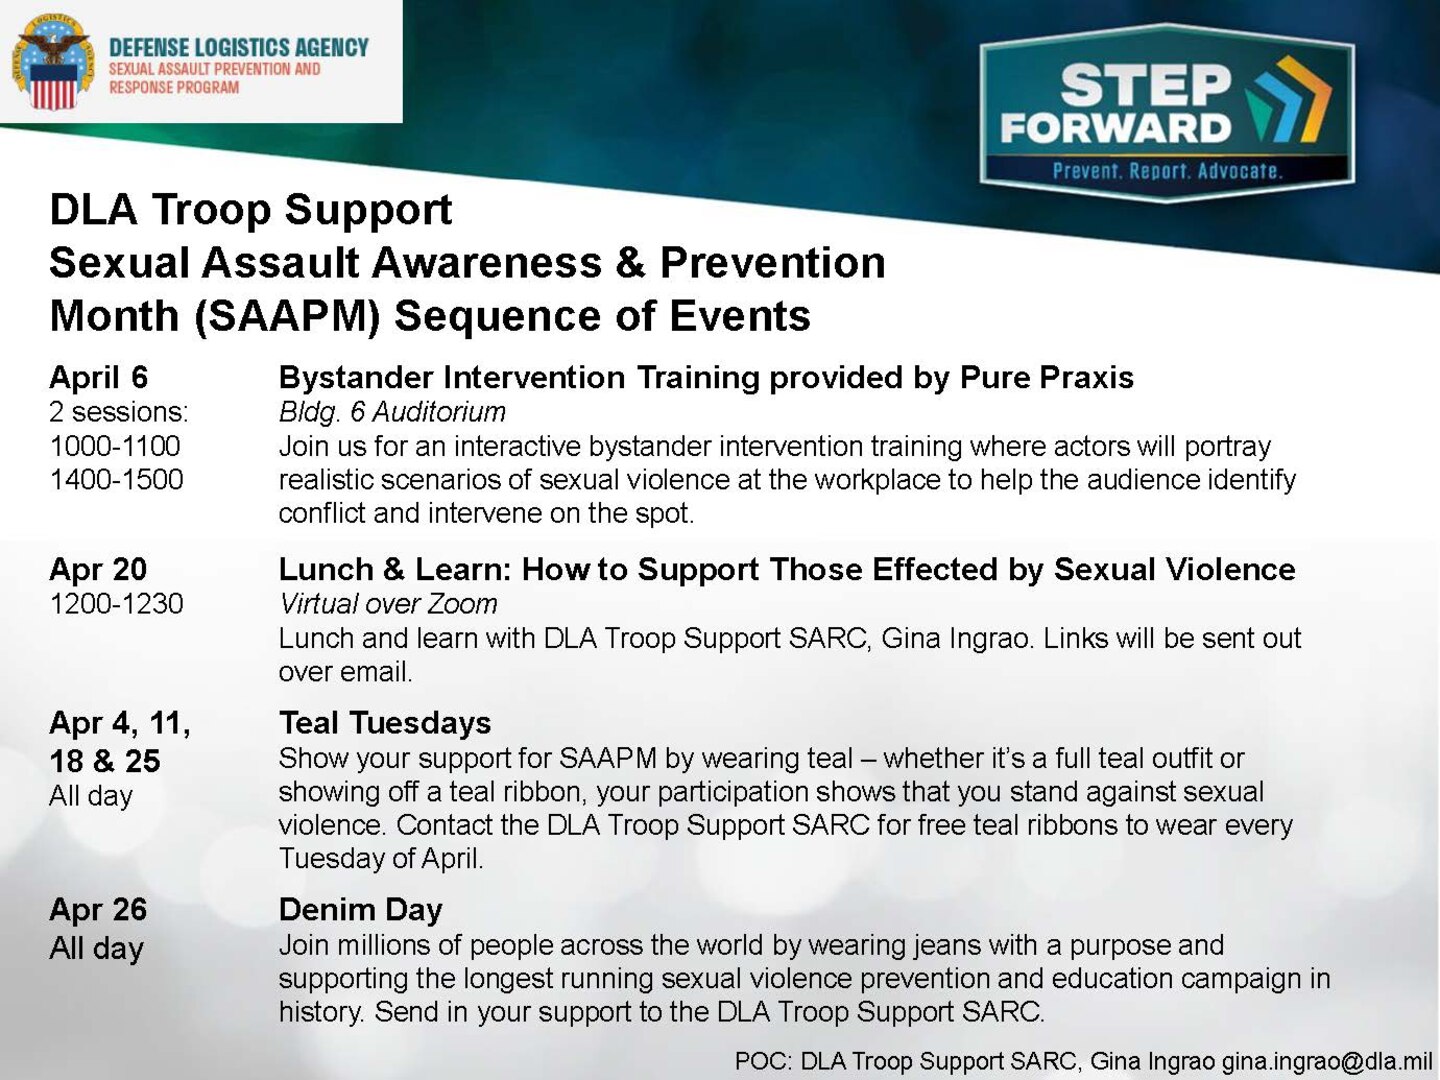 April 1 begins Sexual Assault Awareness & Prevention Month. The Defense Logistics Agency Troop Support will host several events and activities throughout the month at Naval Support Activity Philadelphia.